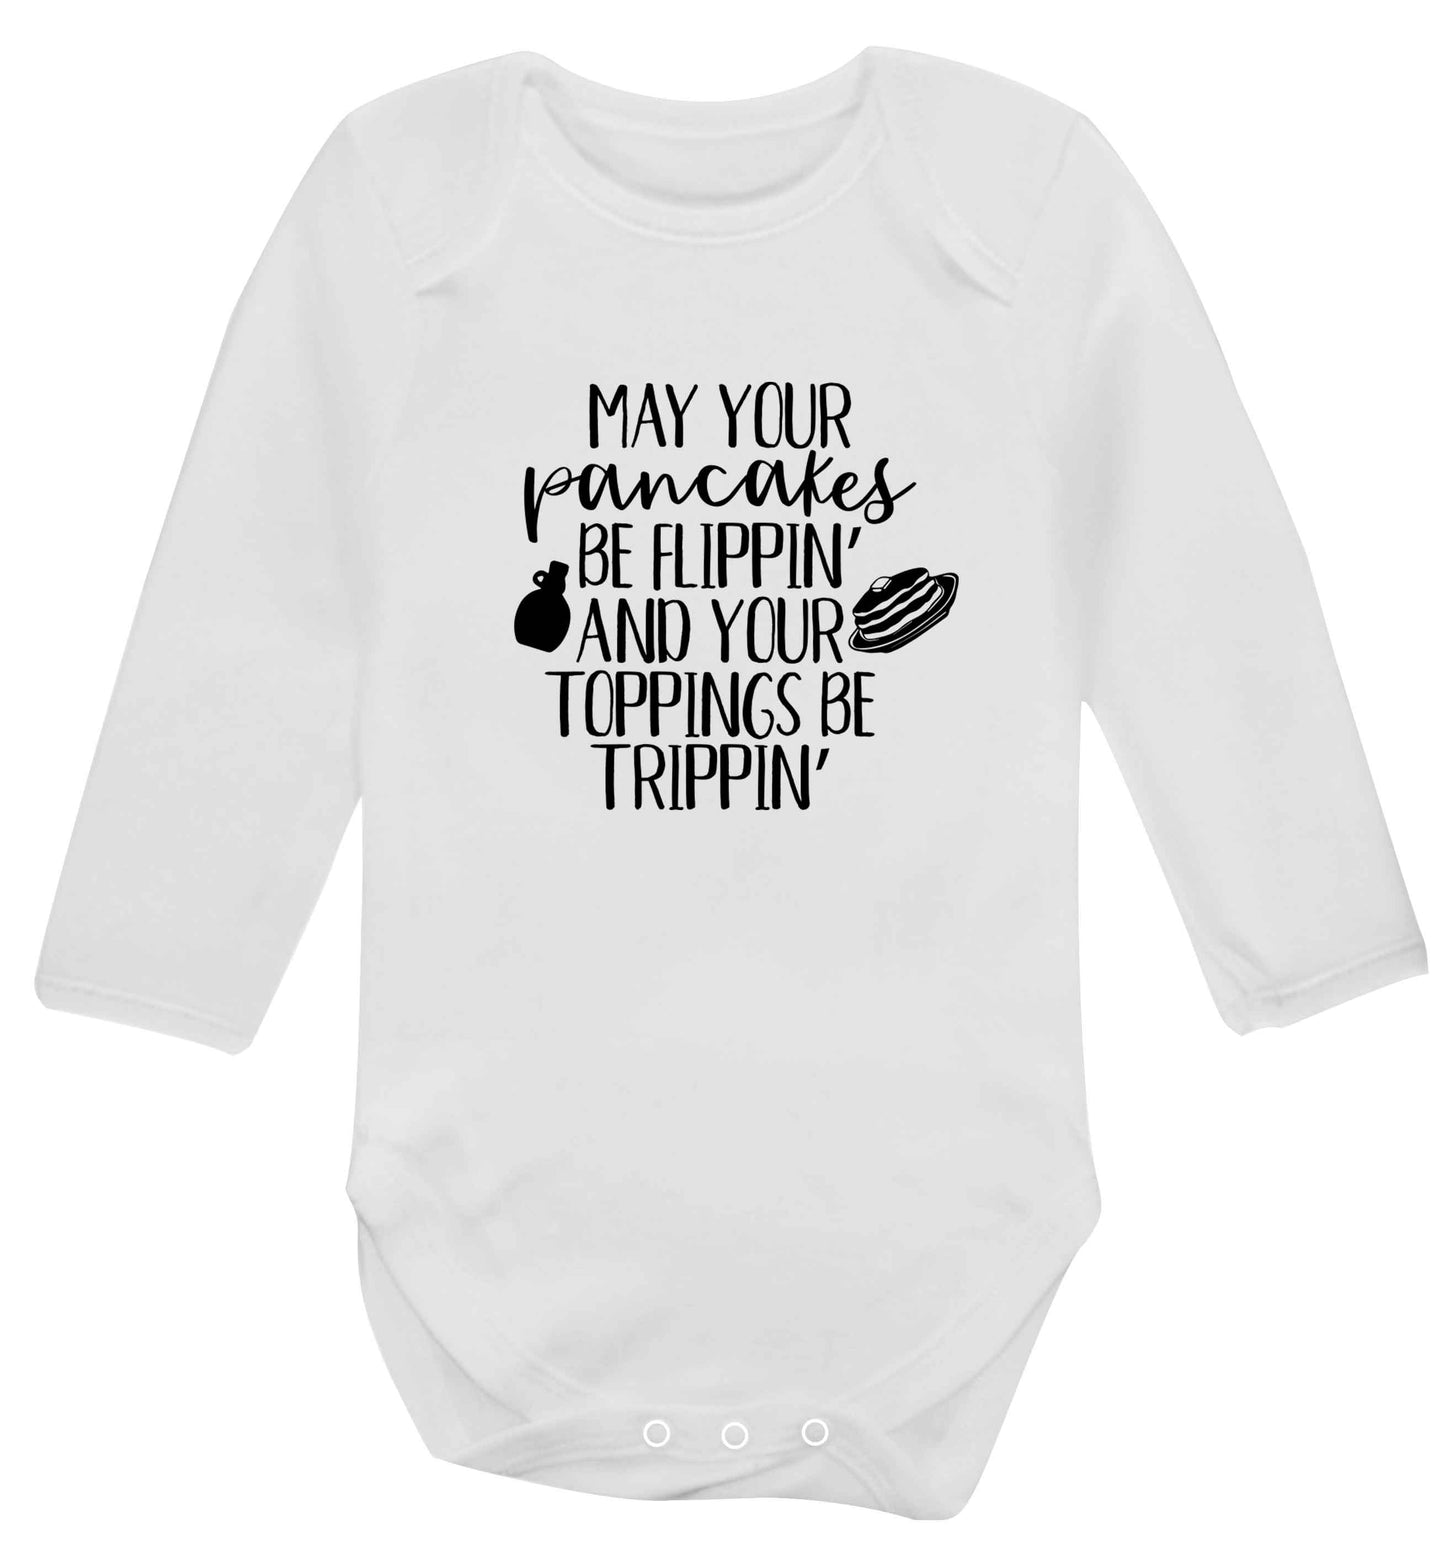 May your pancakes be flippin' and your toppings be trippin' baby vest long sleeved white 6-12 months